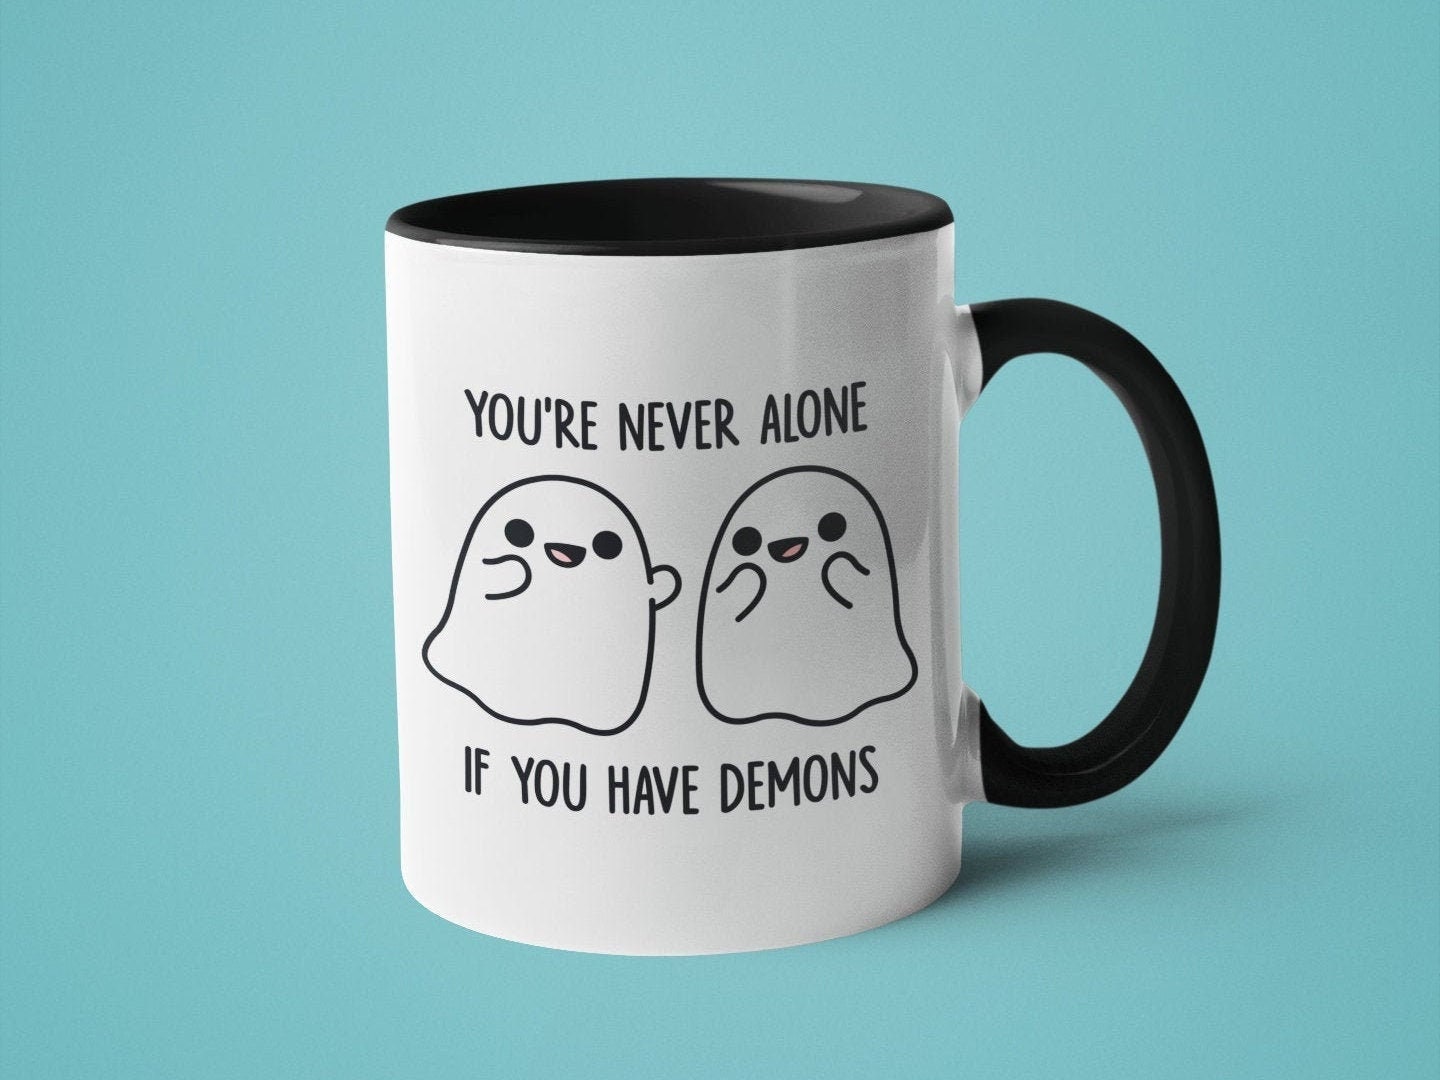 Cute Coffee Mugs for Best Friends Together We're Freaking Weird